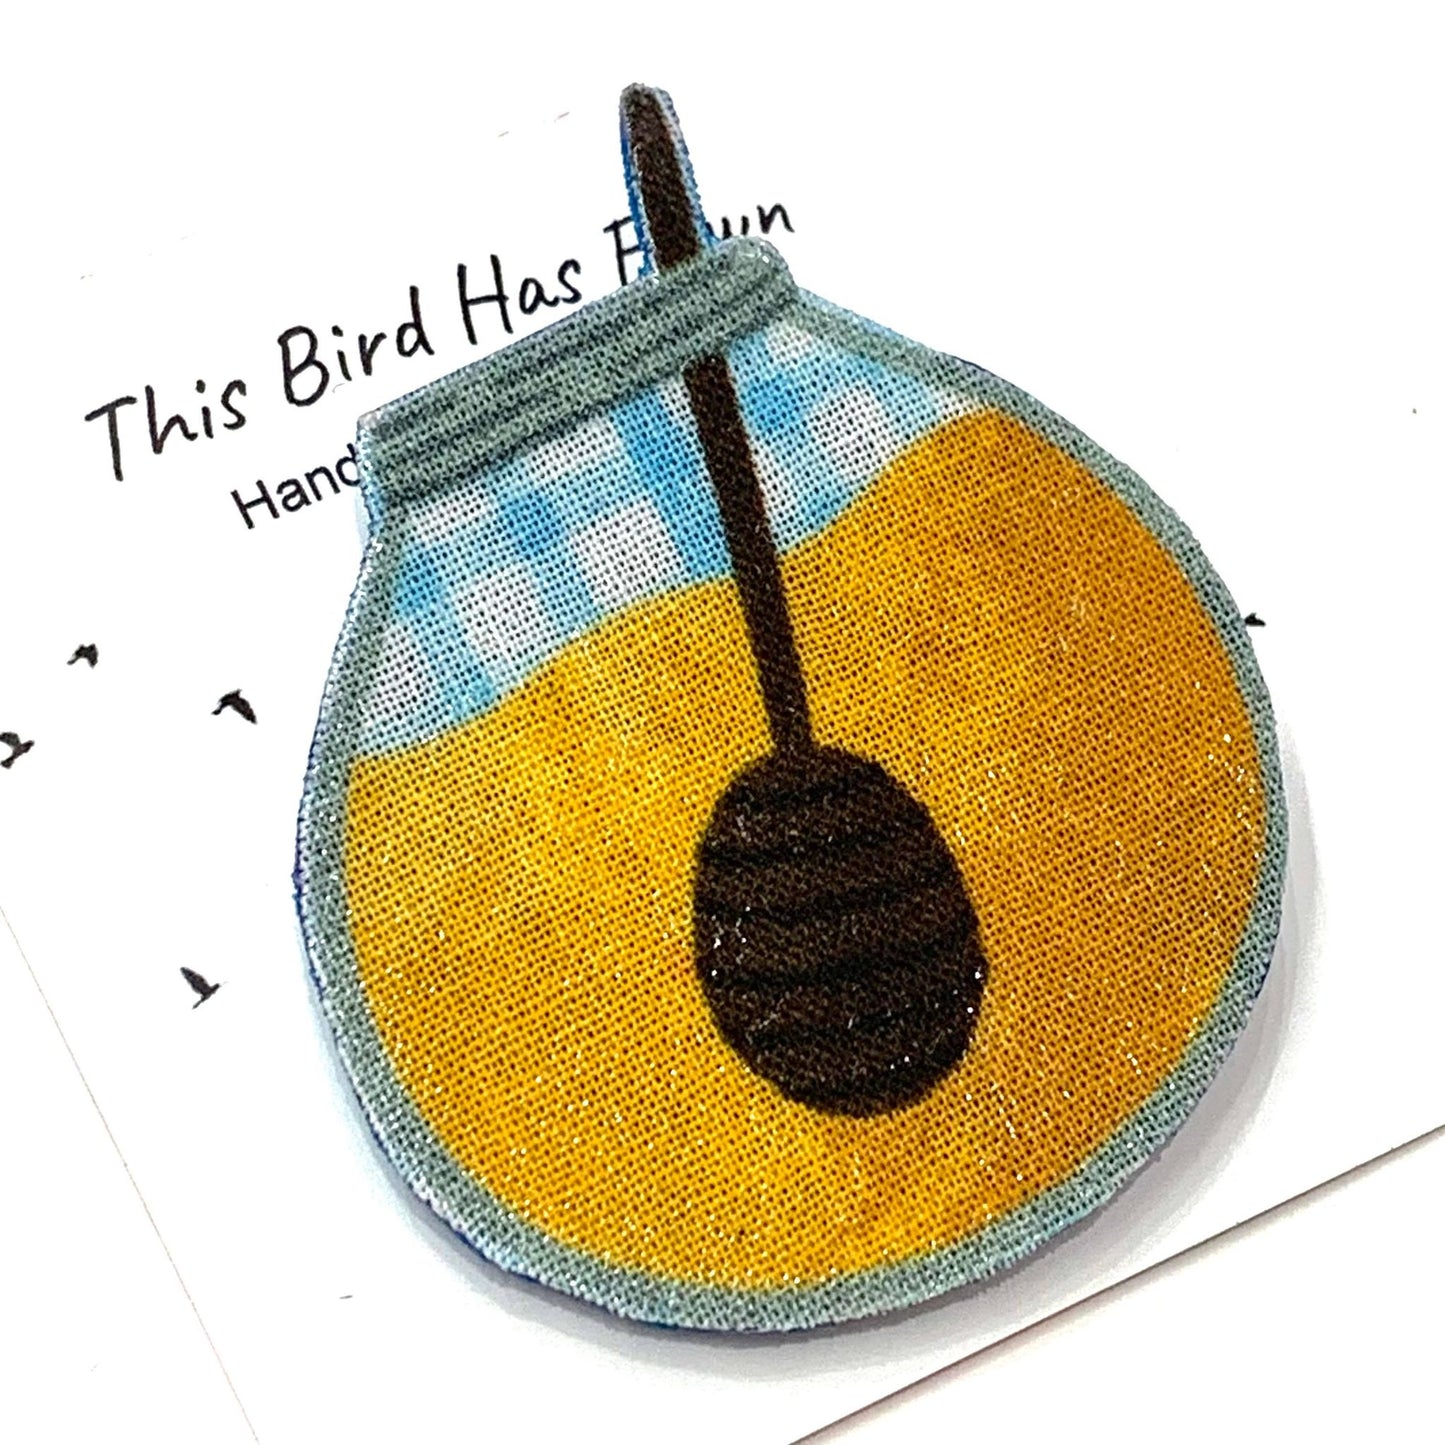 THIS BIRD HAS FLOWN- "Pickles & Preserves" Remnant Brooches- Honey Jar